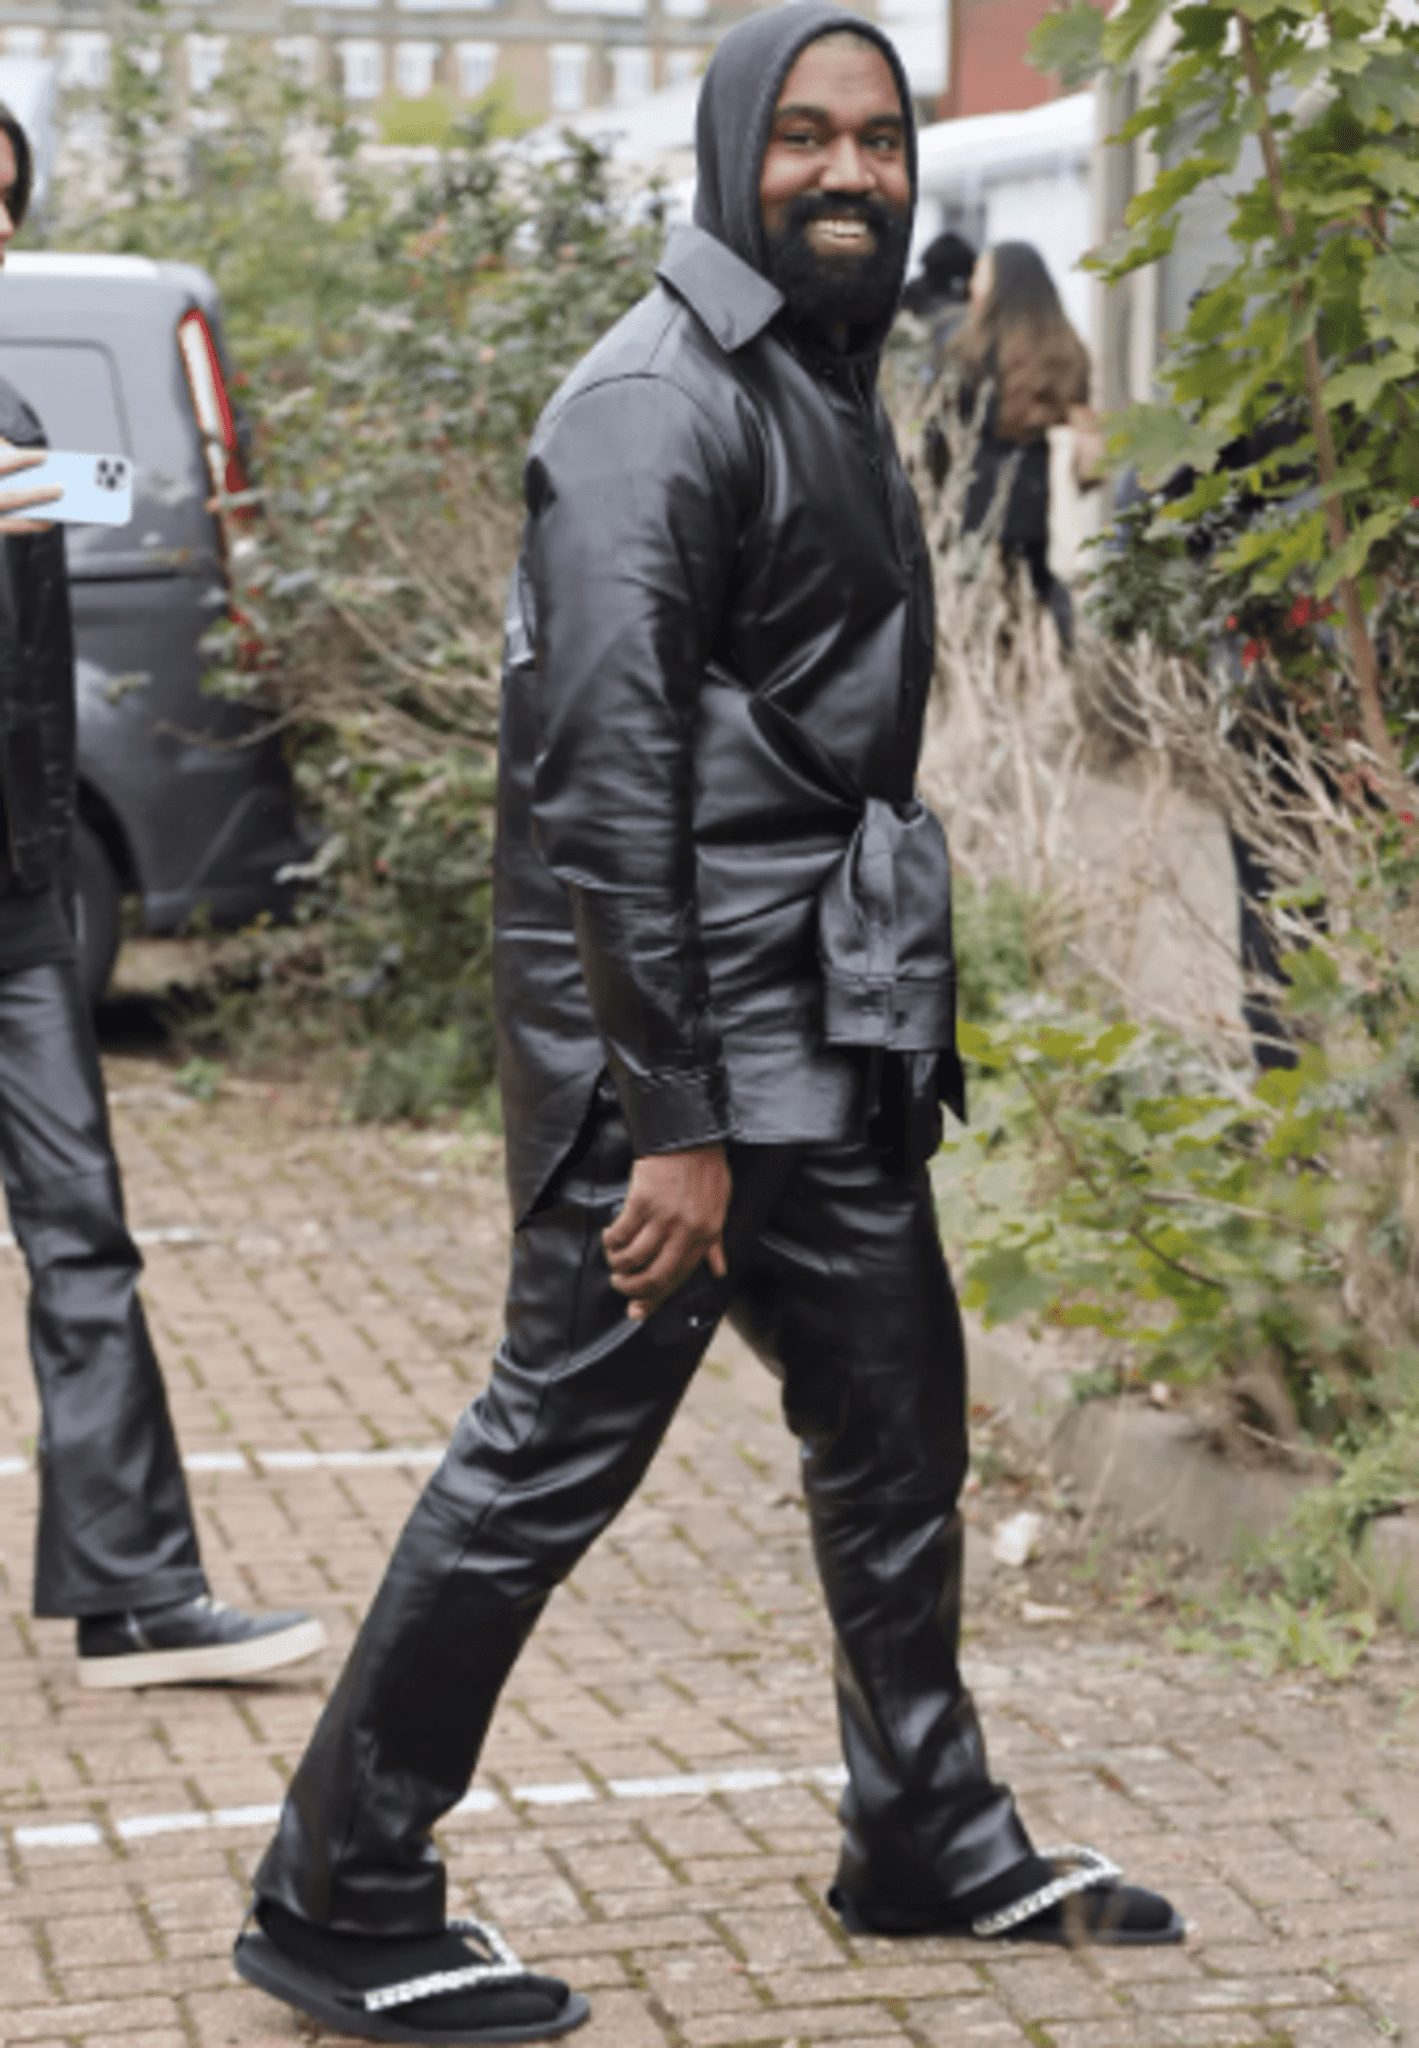 Wearing Sparkly Flip Flops And Socks, Kanye West Attends The Burberry Show